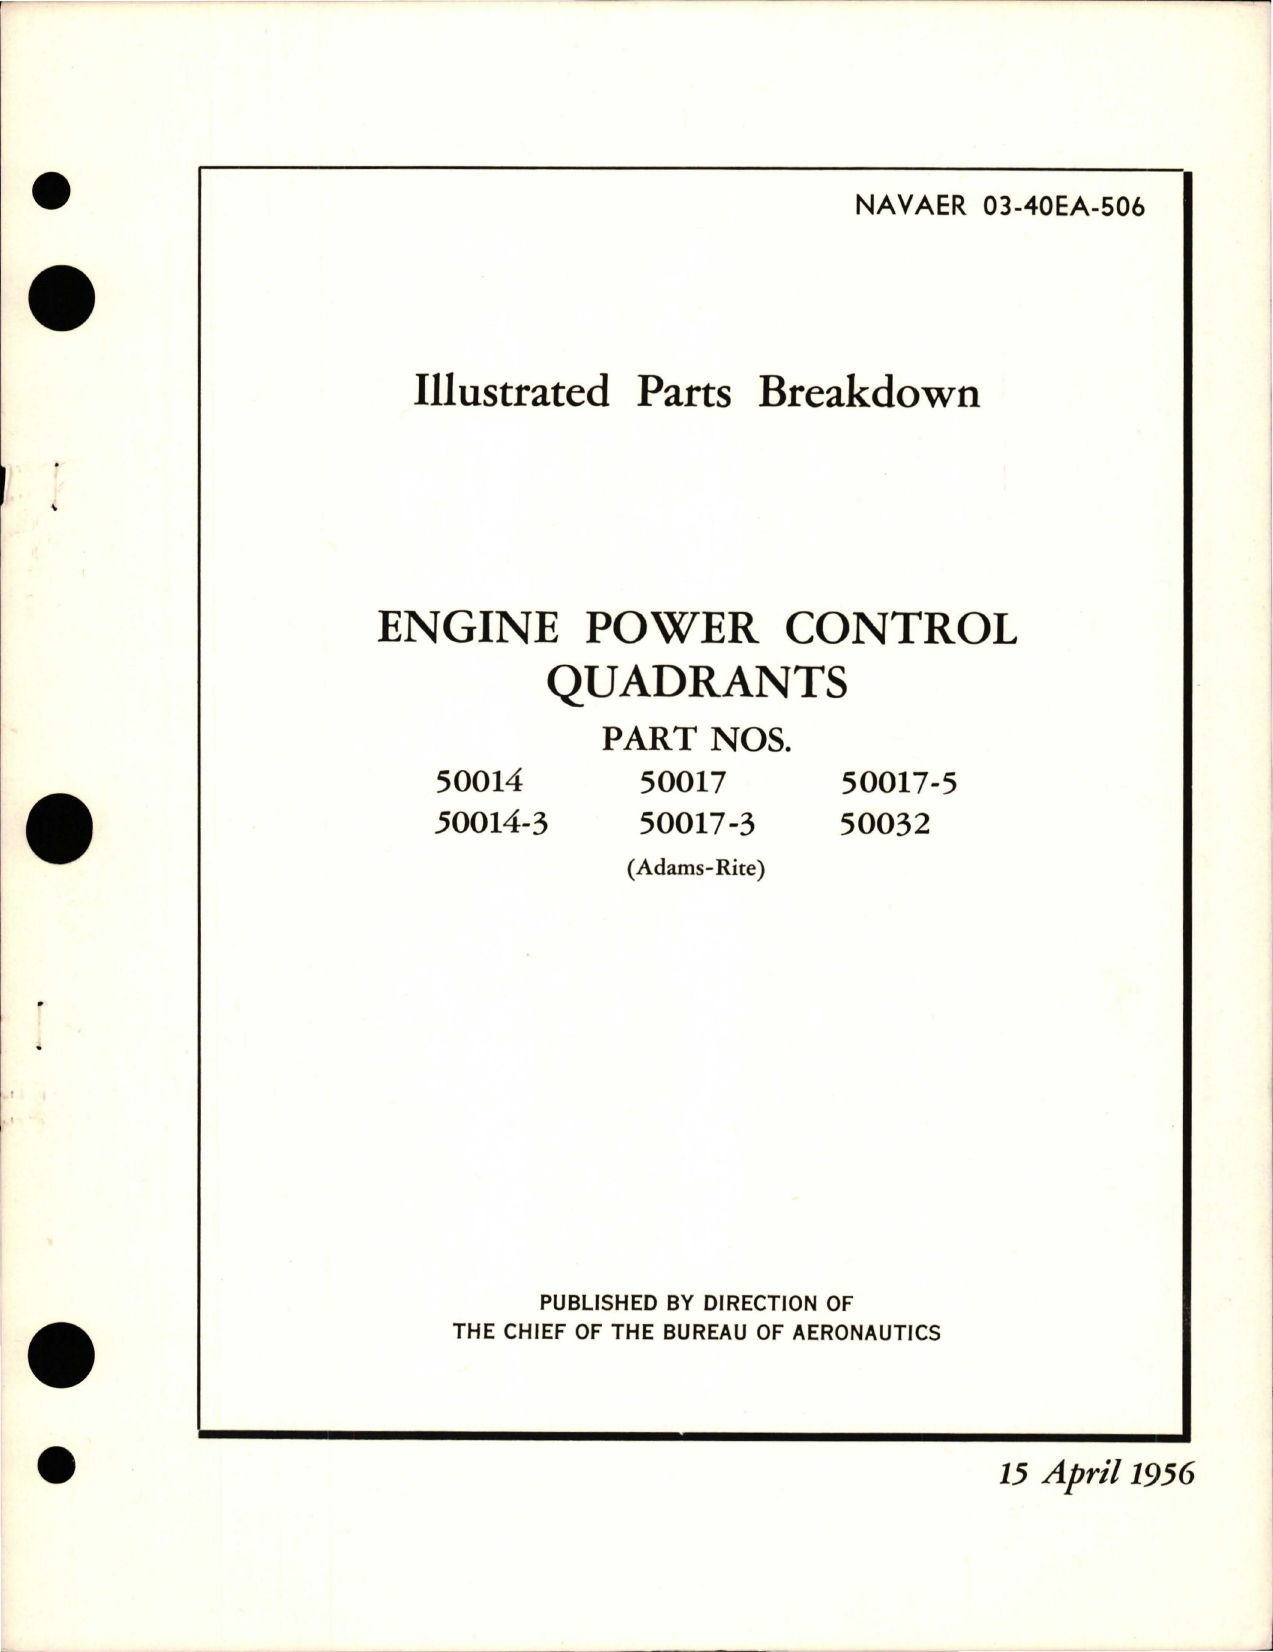 Sample page 1 from AirCorps Library document: Illustrated Parts Breakdown for Engine Power Control Quadrants